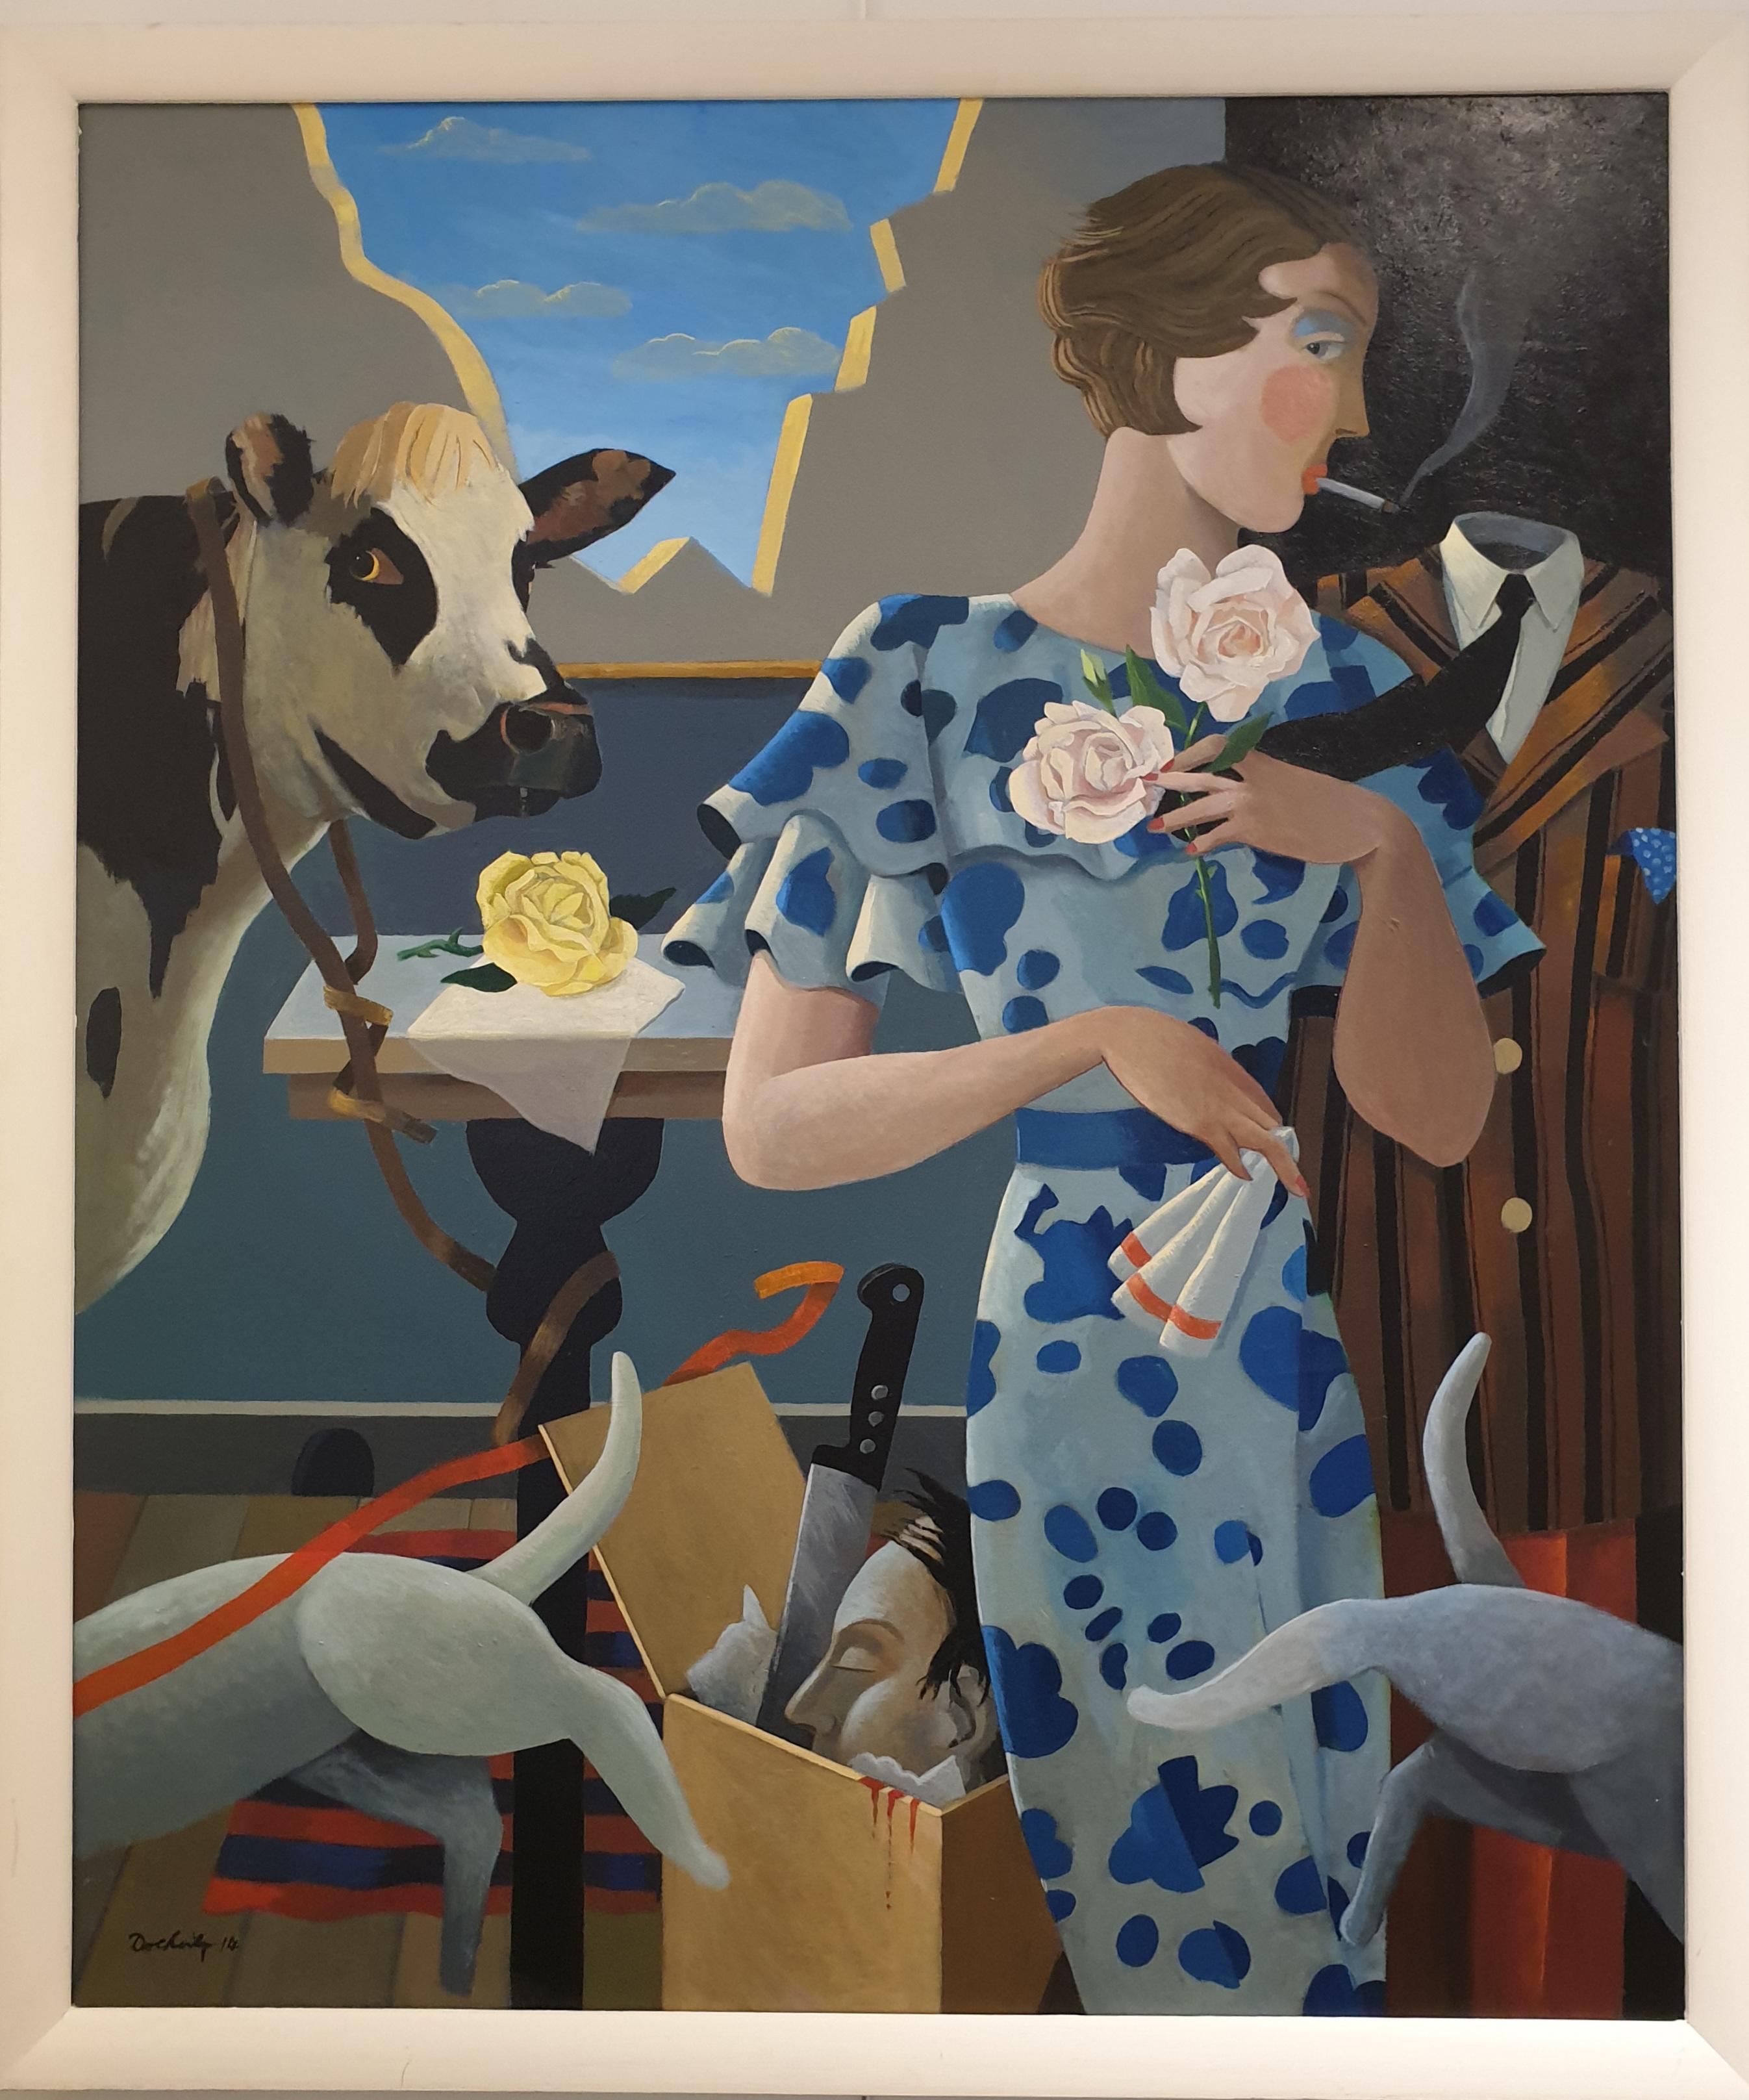 Frank McLean Docherty Figurative Painting - 'Mad Cow'. Large Contemporary Scottish Surrealist Acrylic on Canvas.